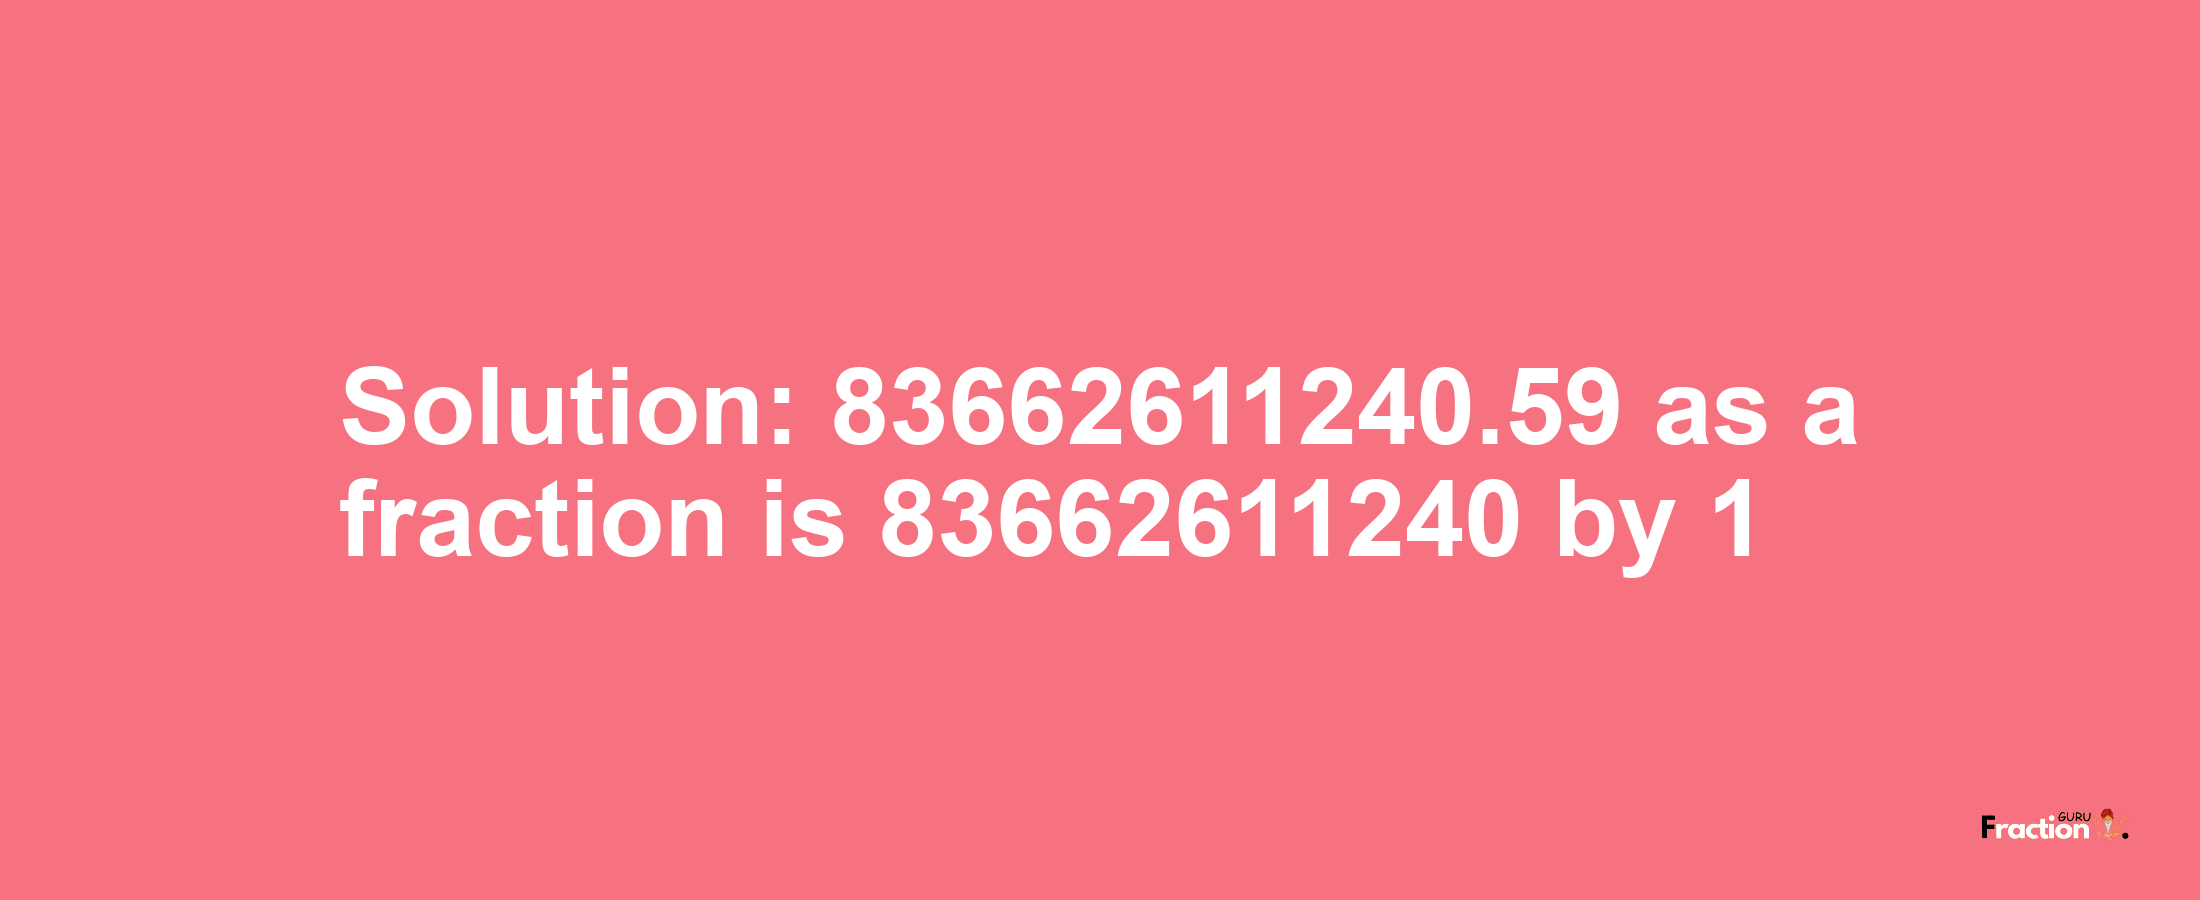 Solution:83662611240.59 as a fraction is 83662611240/1